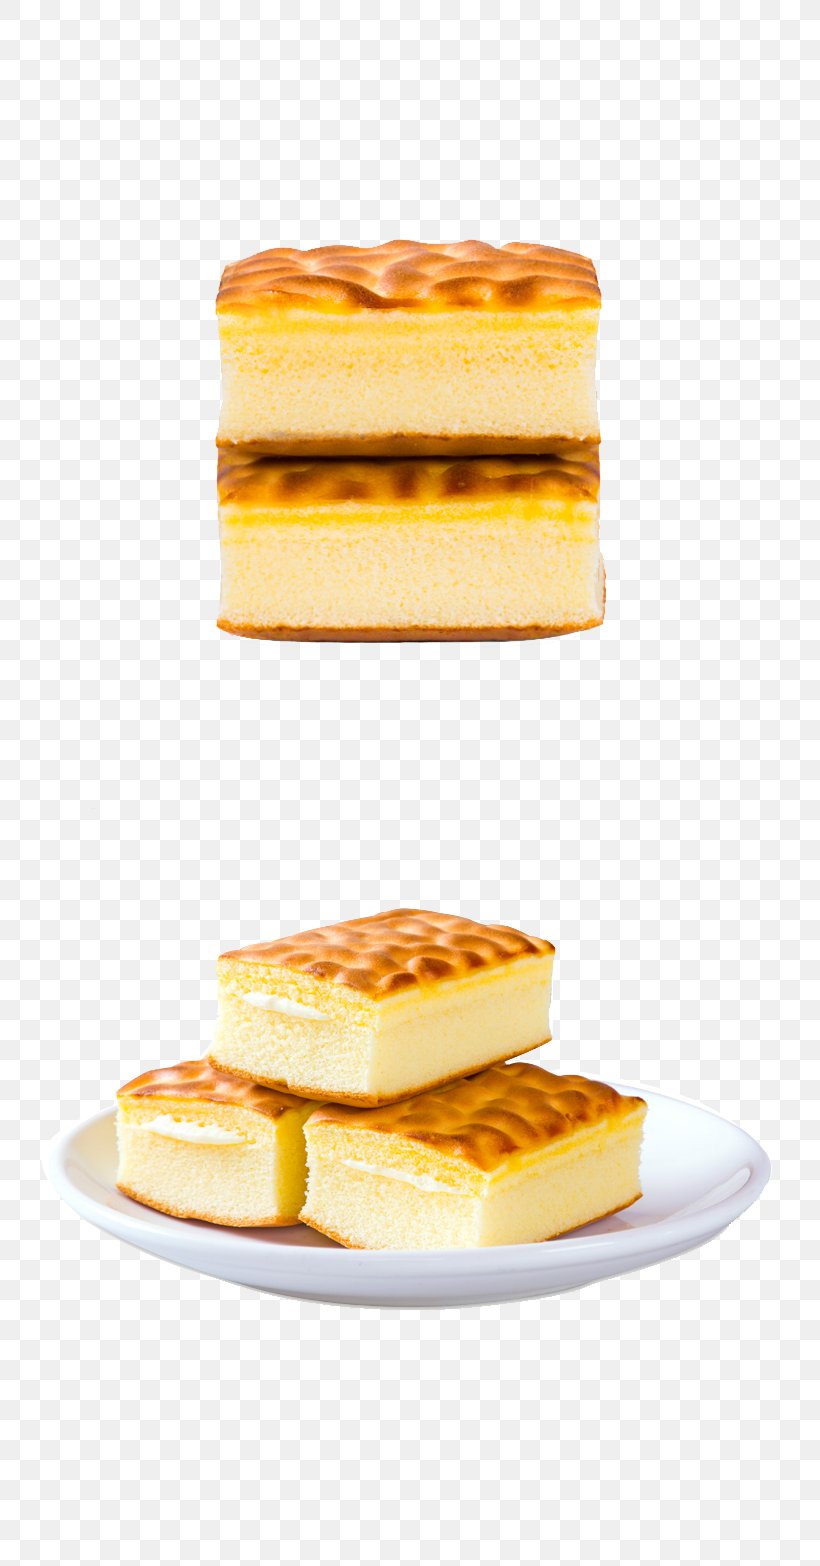 Dim Sum Breakfast Cake Bread Pastry, PNG, 790x1566px, Dim Sum, Bread, Breakfast, Butter, Cake Download Free